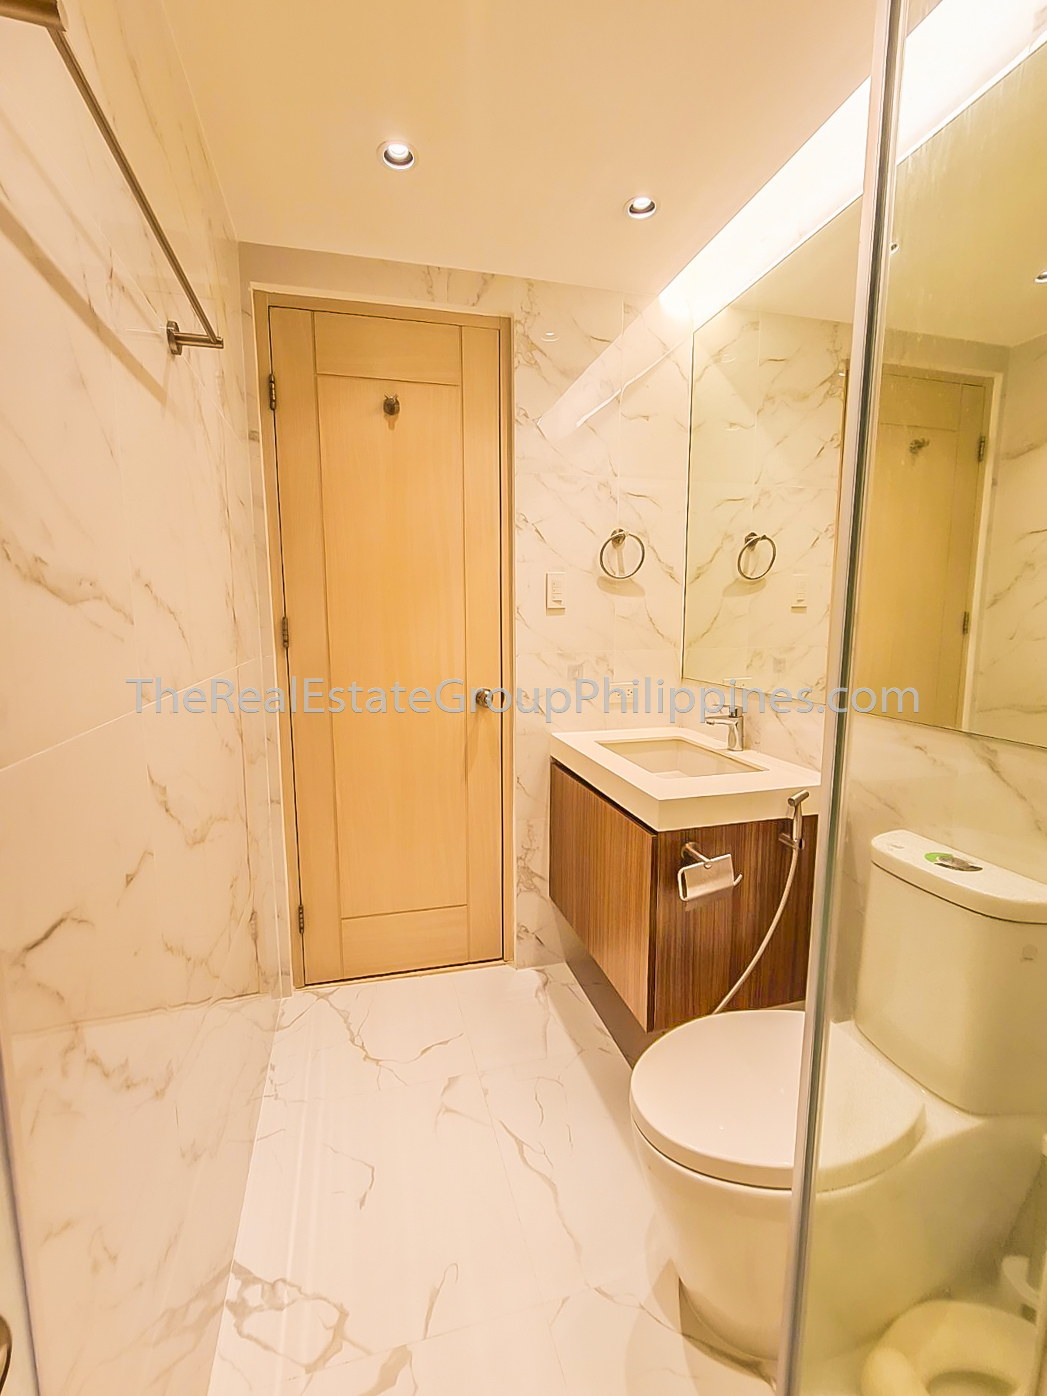 1BR Condo For Rent Lease, Icon Residences, BGC (5 of 7)